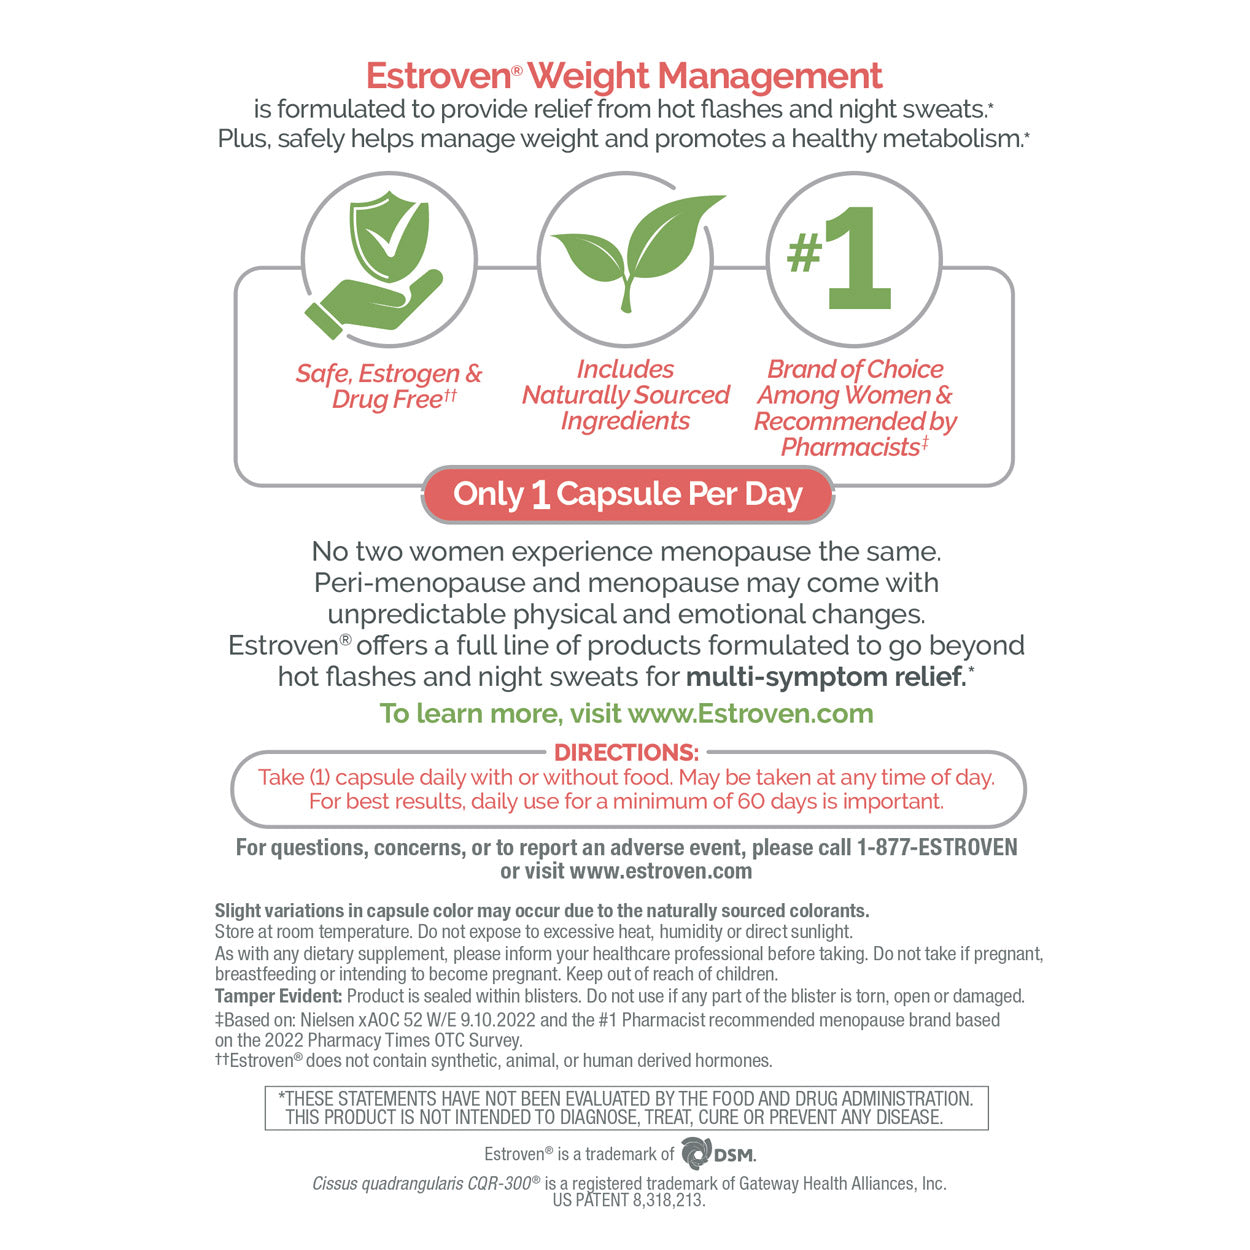 Estroven Weight Management back product label